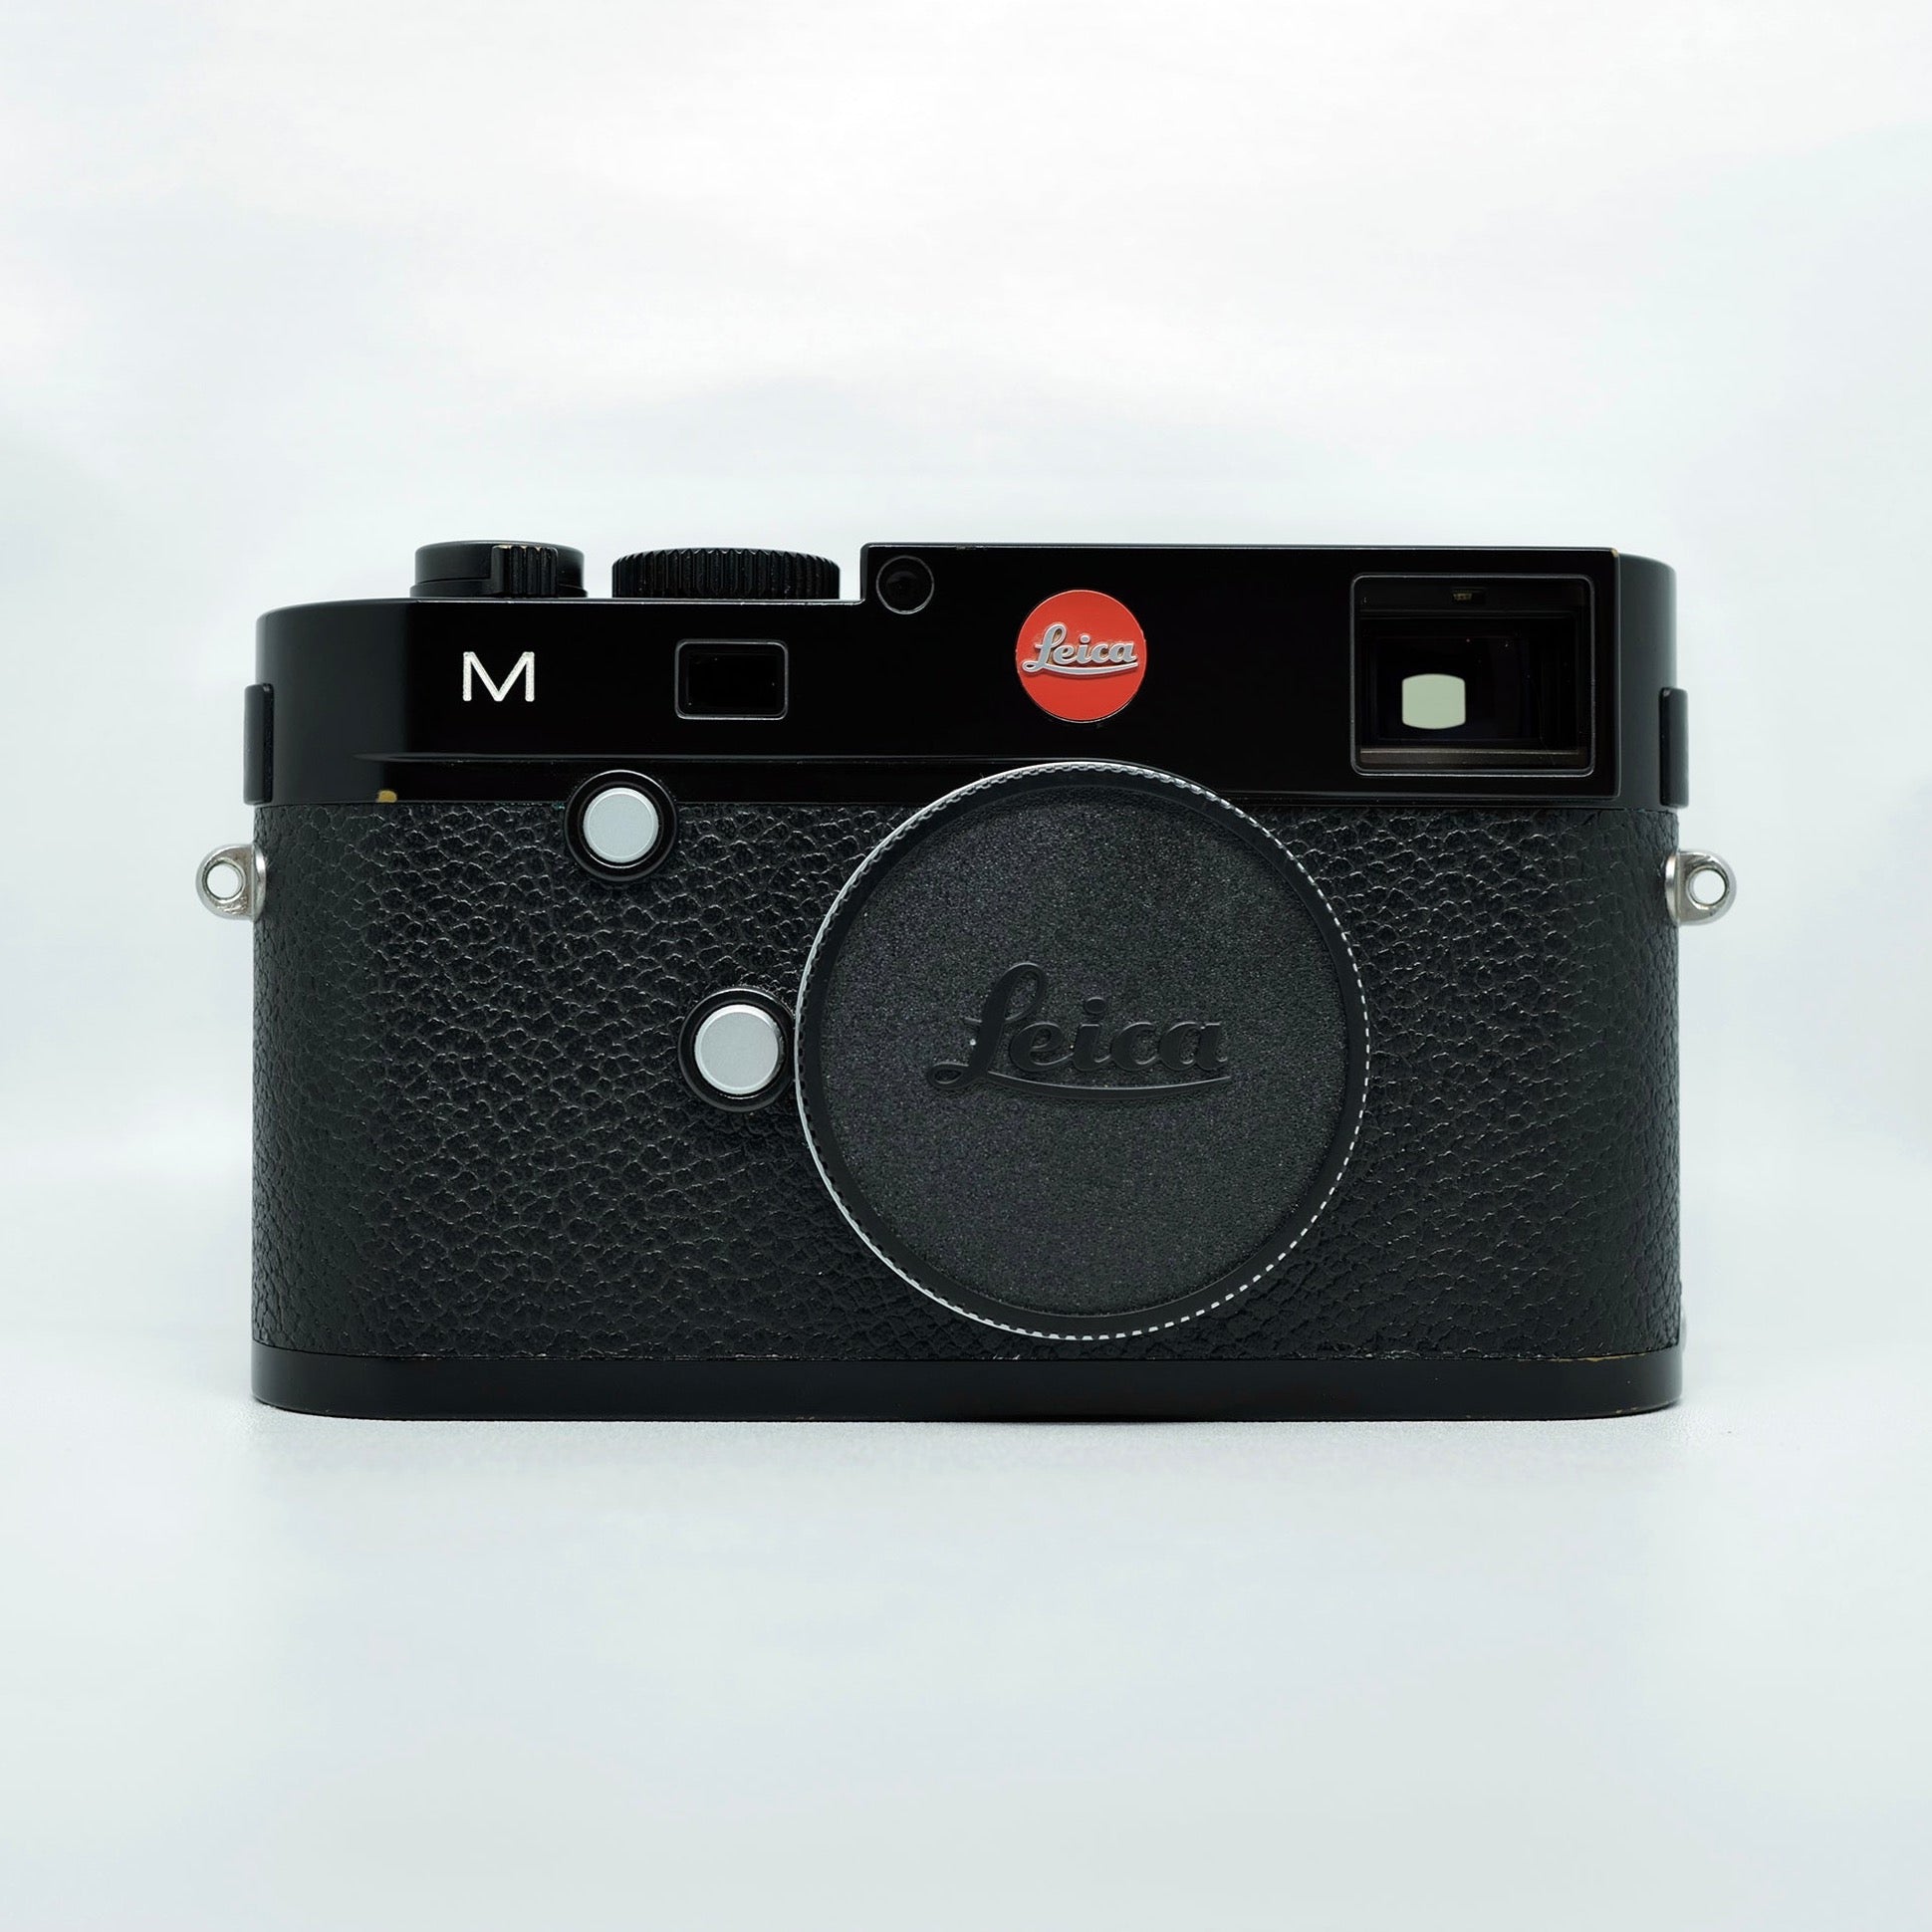 Pre-Owned LEICA M240